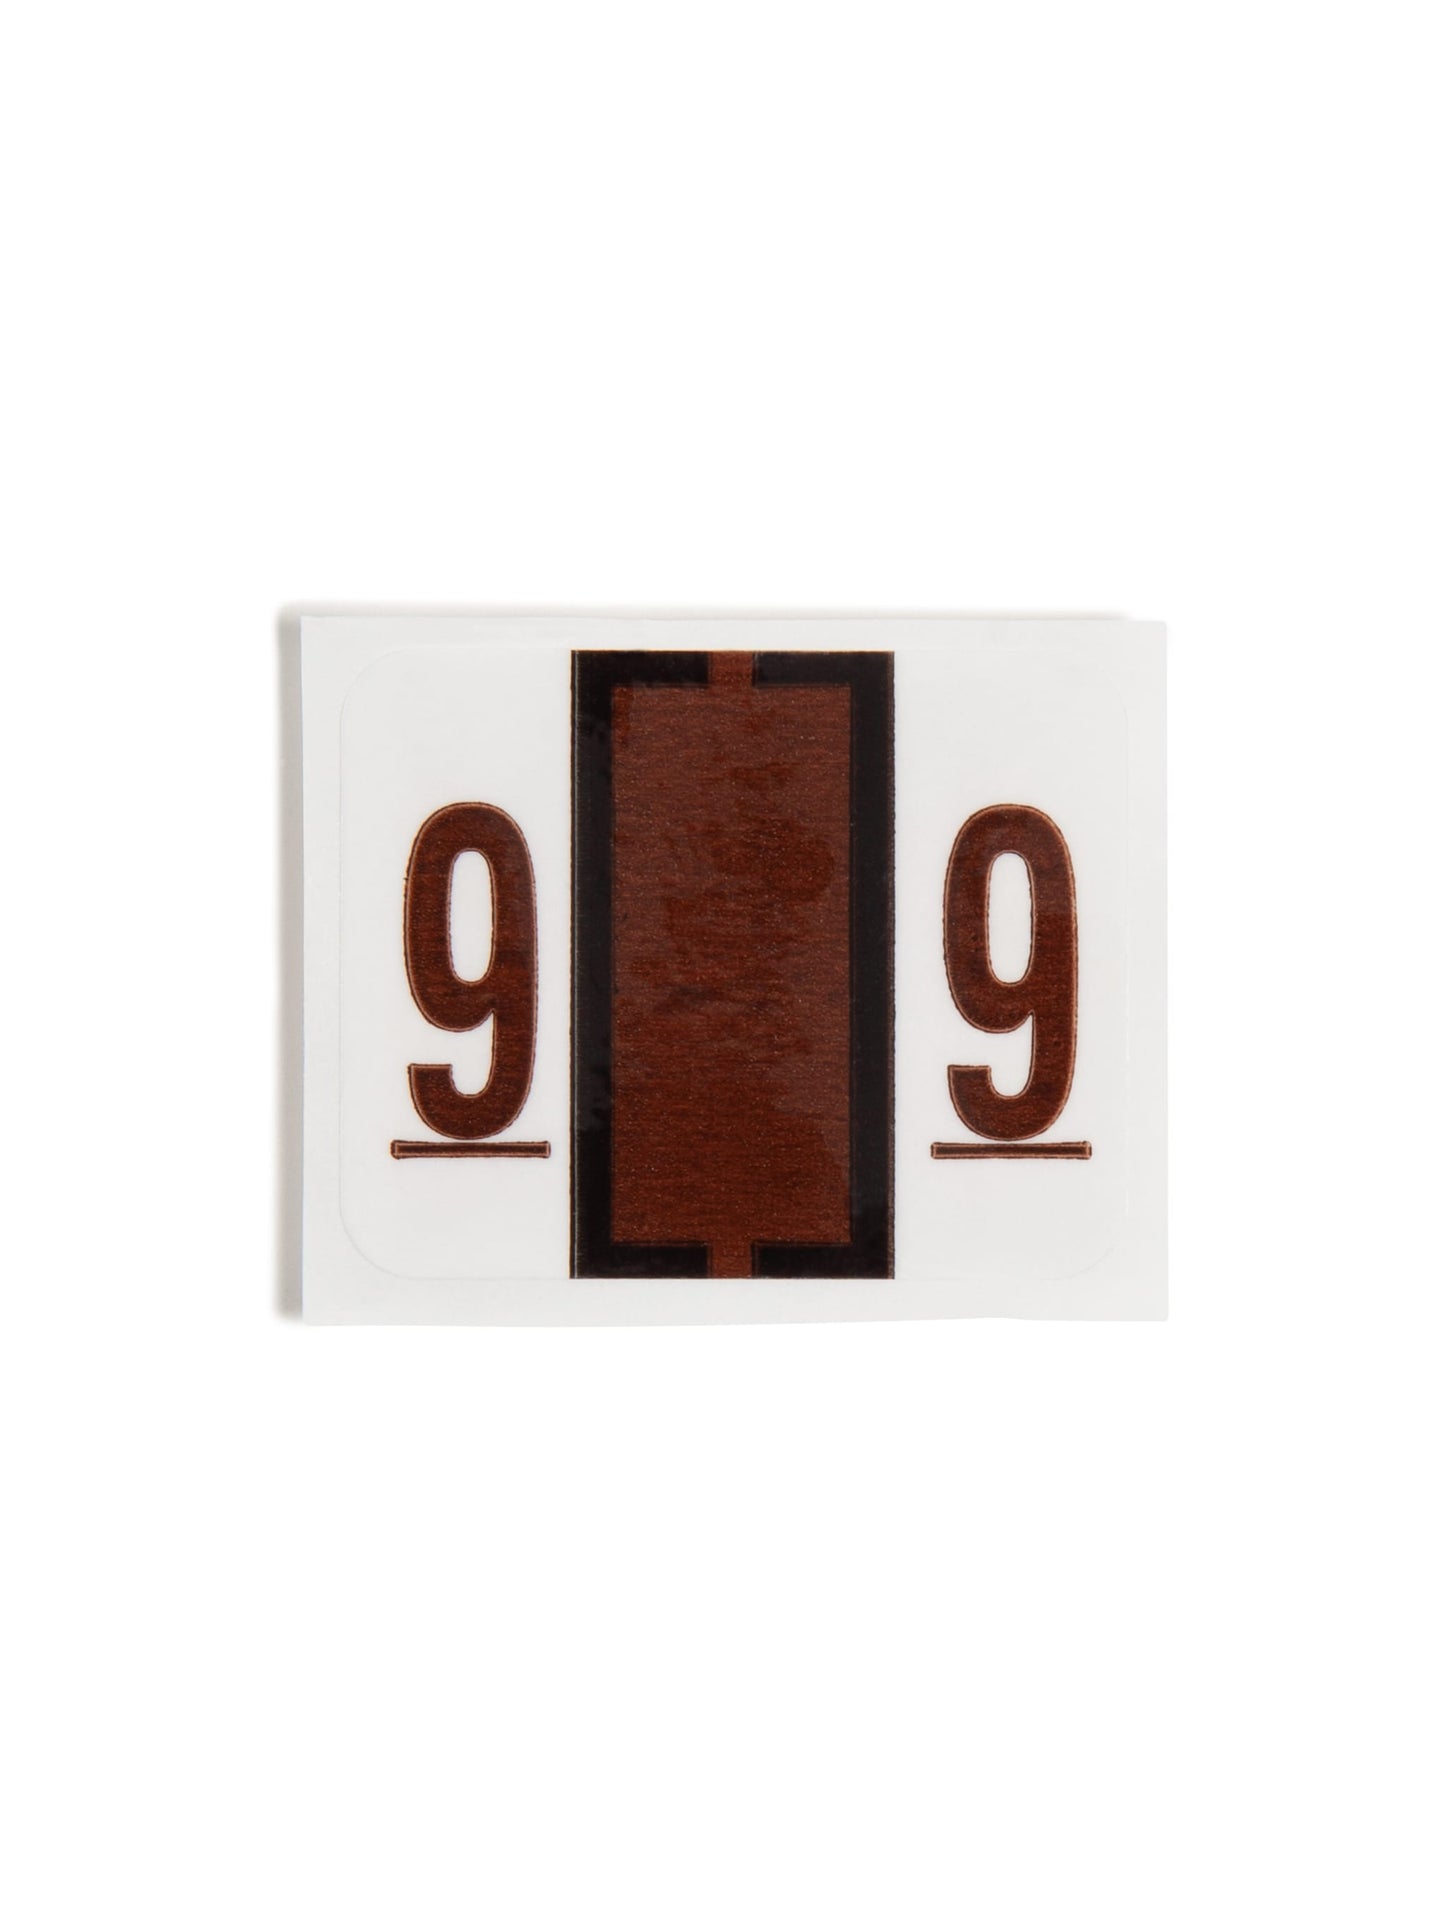 BCCRN Bar Style Color-Coded Numeric Labels, 0-9 Rolls, Brown Color, 1-1/4" X 1" Size, Set of 1, 086486673792